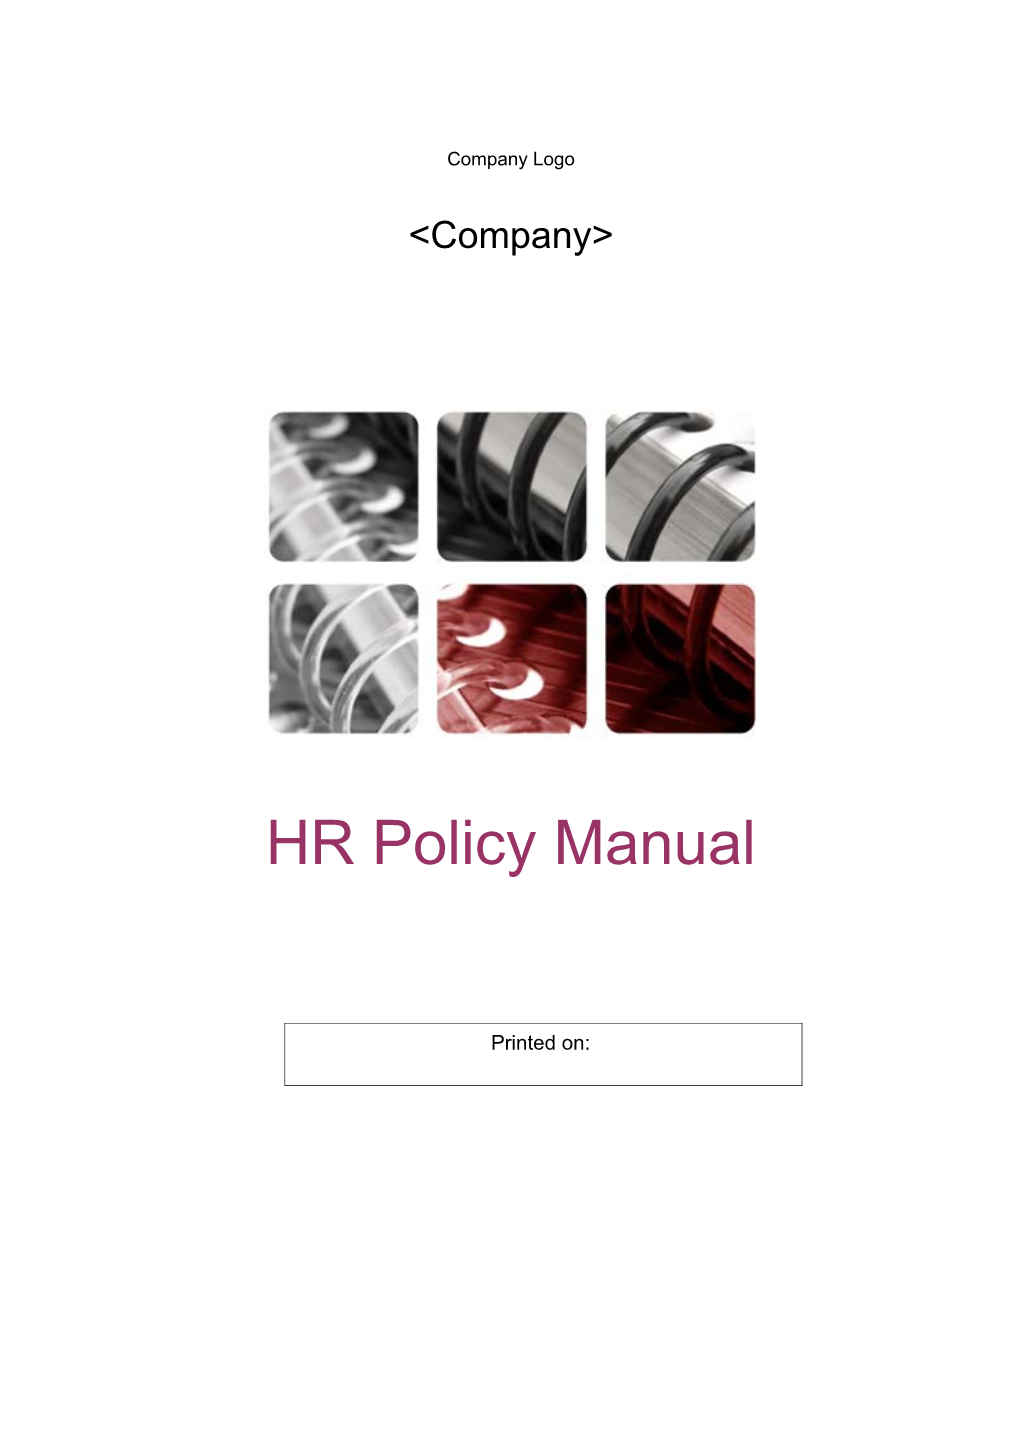 HR Policy Manual